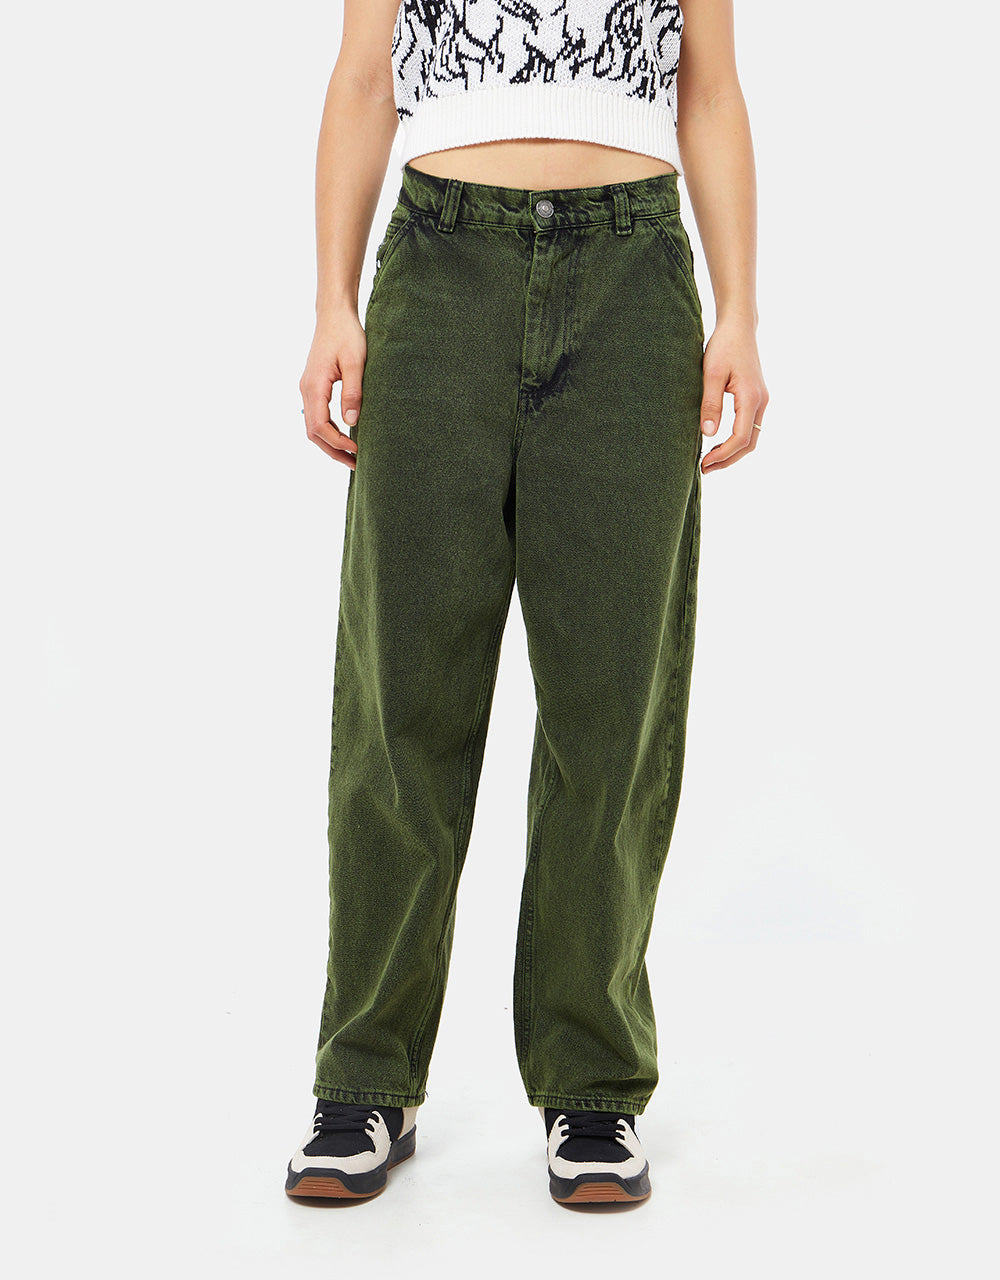 Route One Super Baggy Denim Jeans - Leaf Green